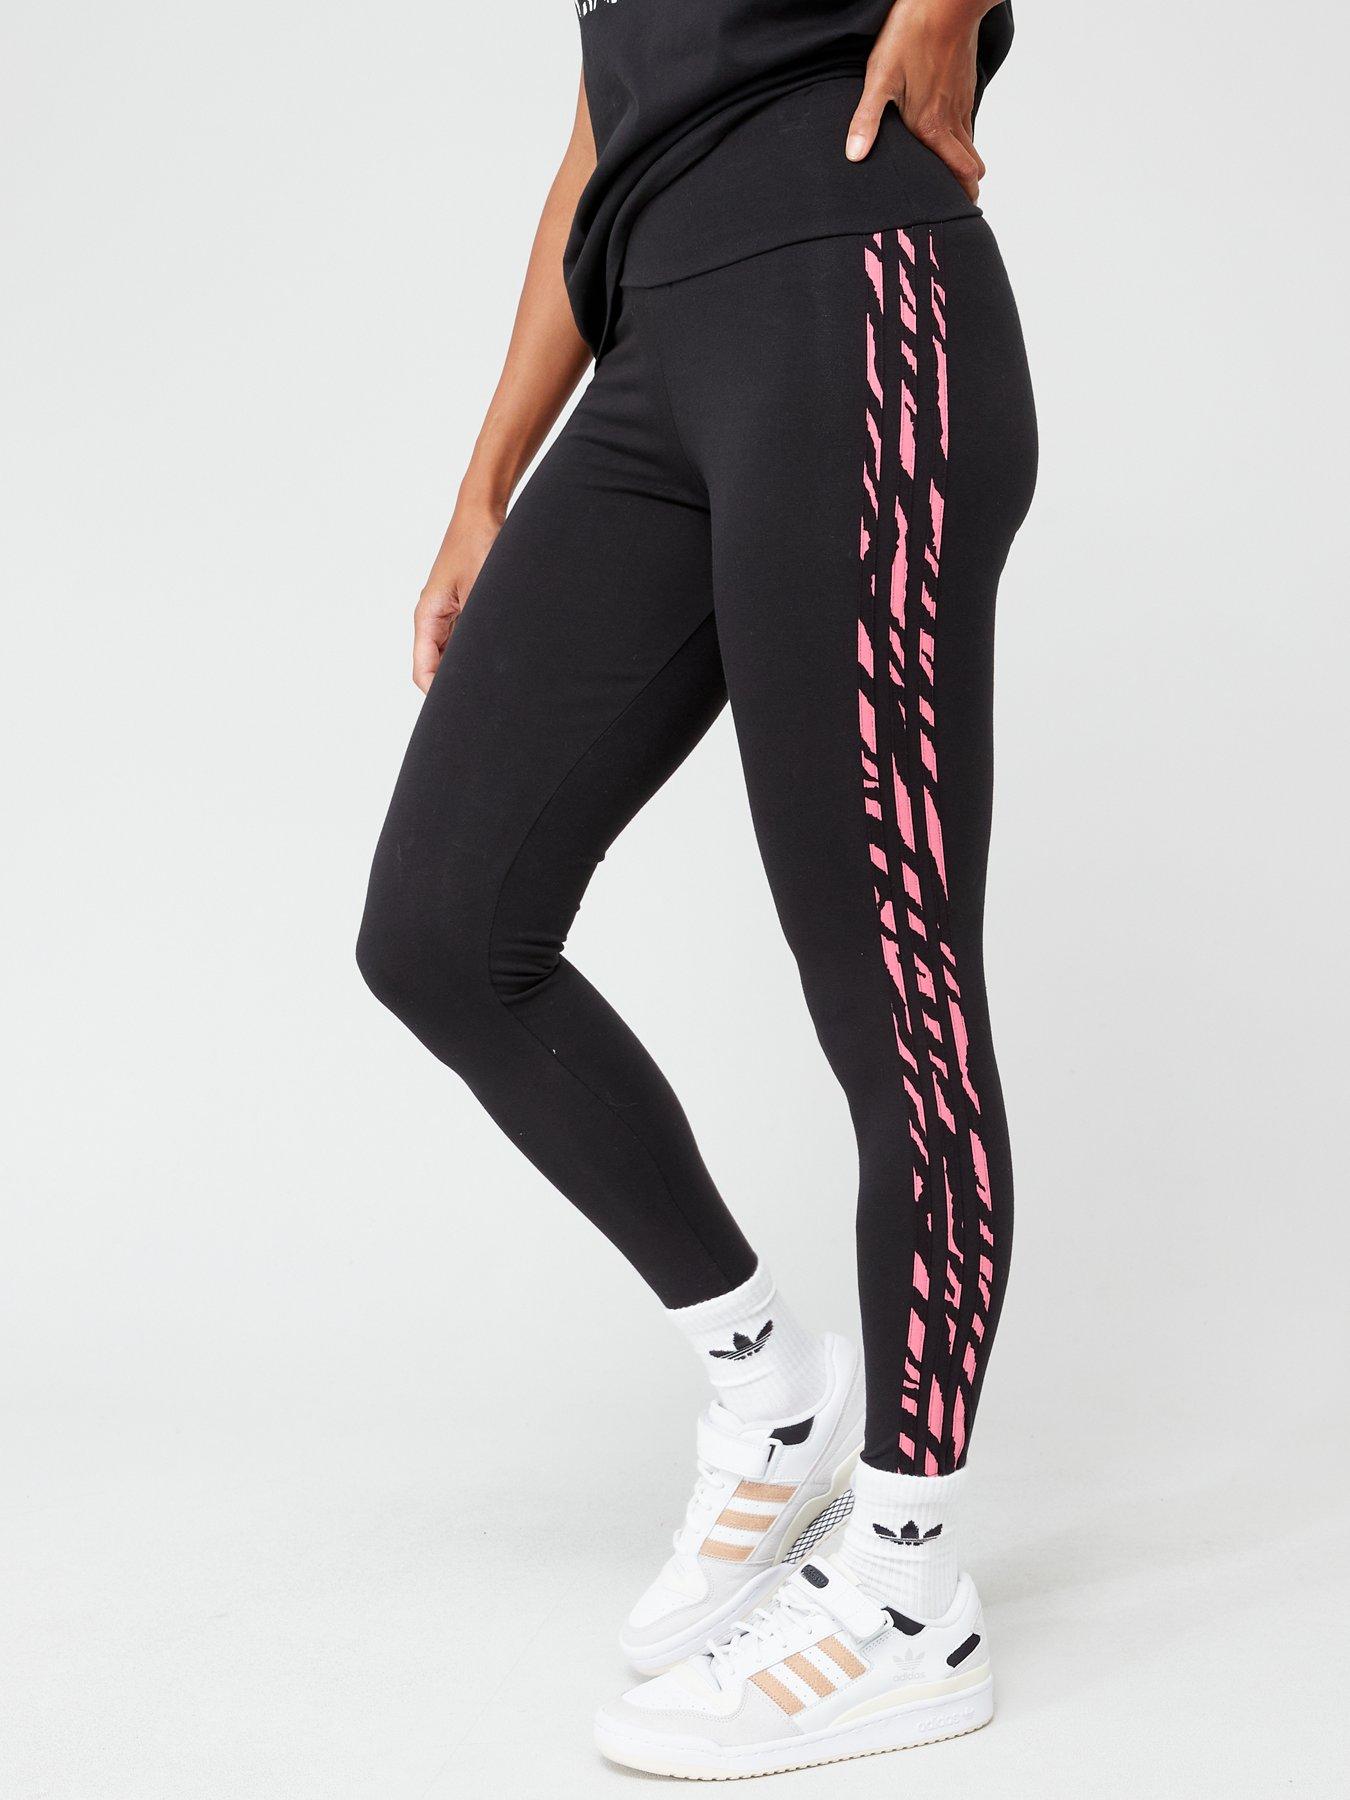 adidas Originals 3 Stripes Legging  Outfits with leggings, Womens printed  leggings, Sporty outfits